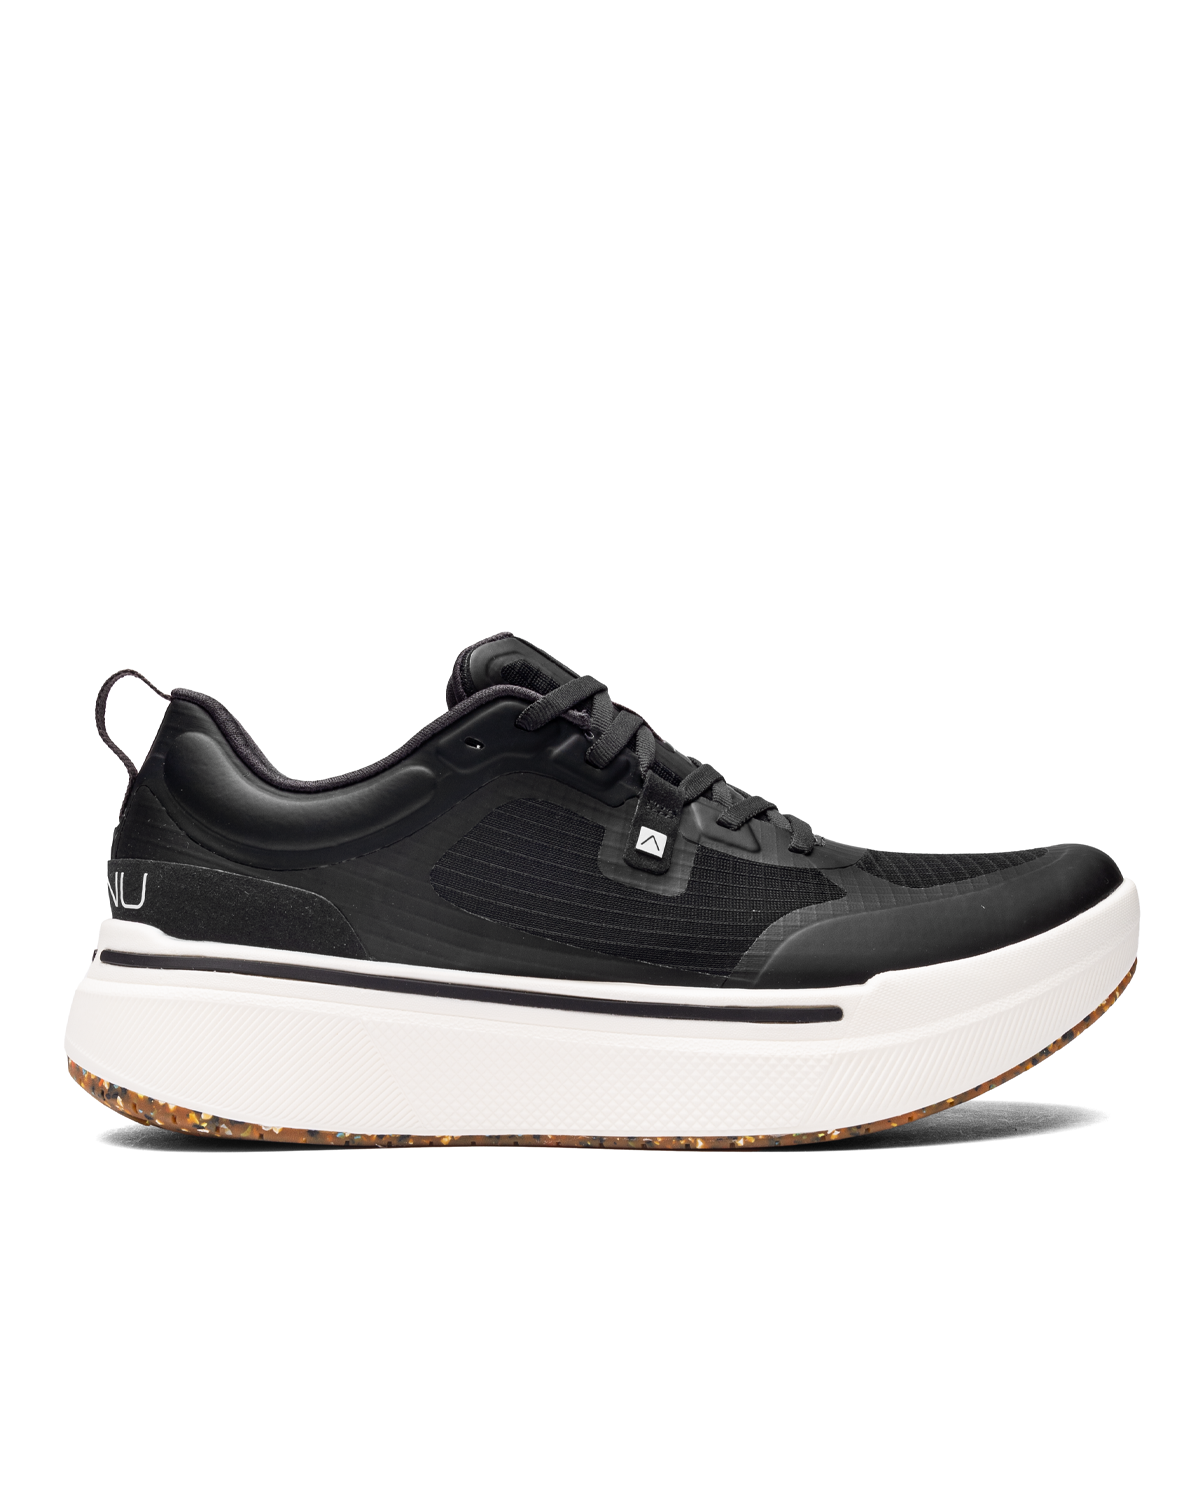 Sequence 1 Low Black / White (Women's)